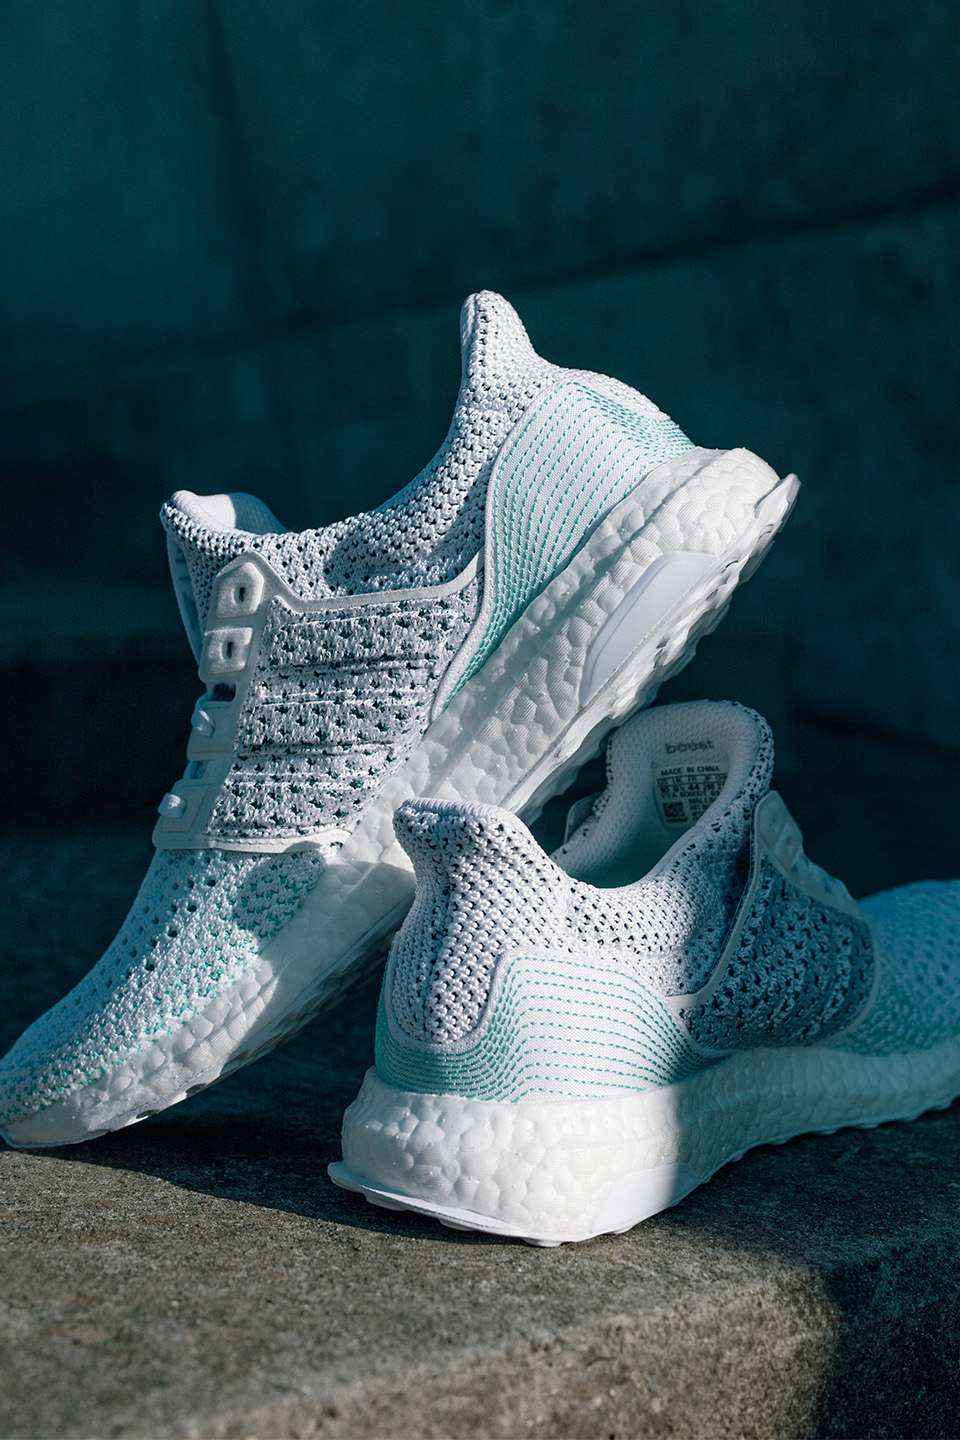 adidas x Parley Continues to Raise Awareness on the Perils of Ocean ...